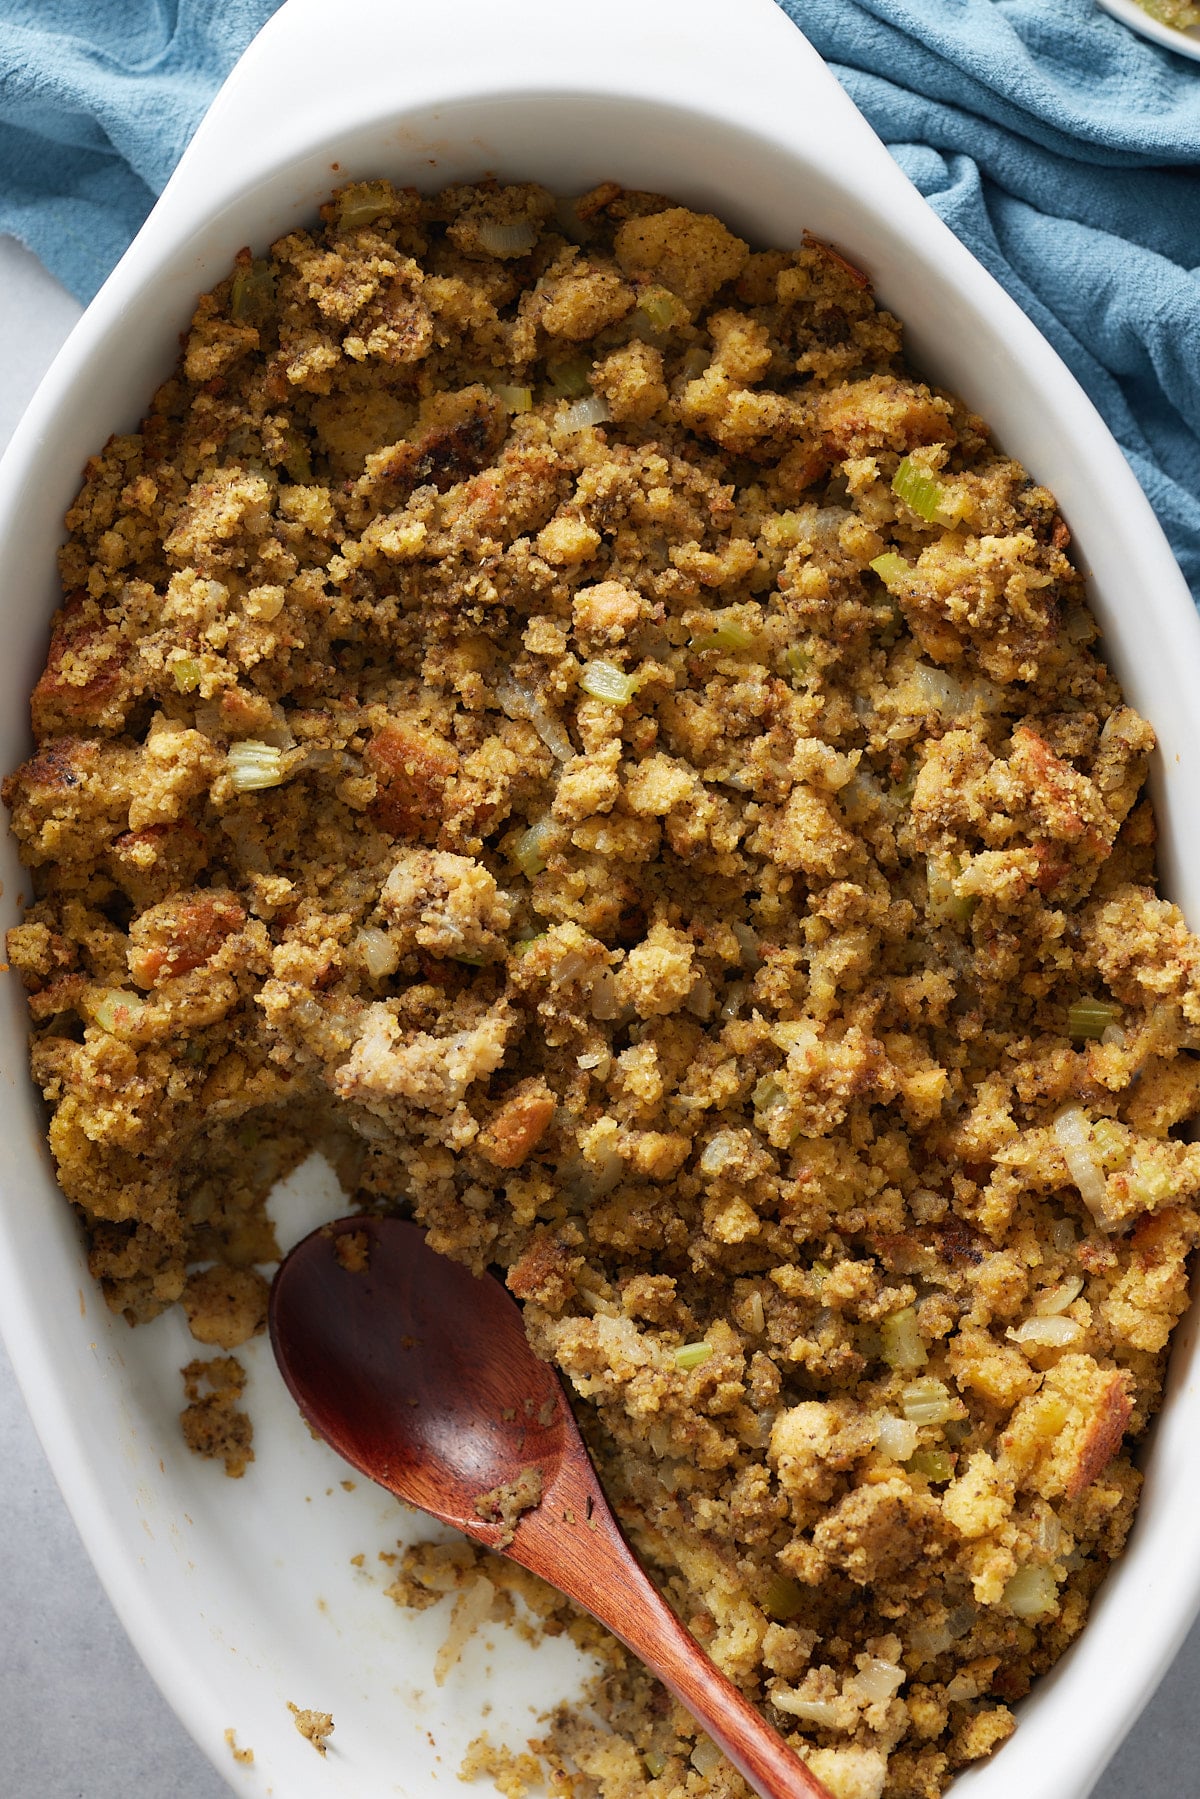 cornbread dressing scooped out of a baking dish with a wood spoon